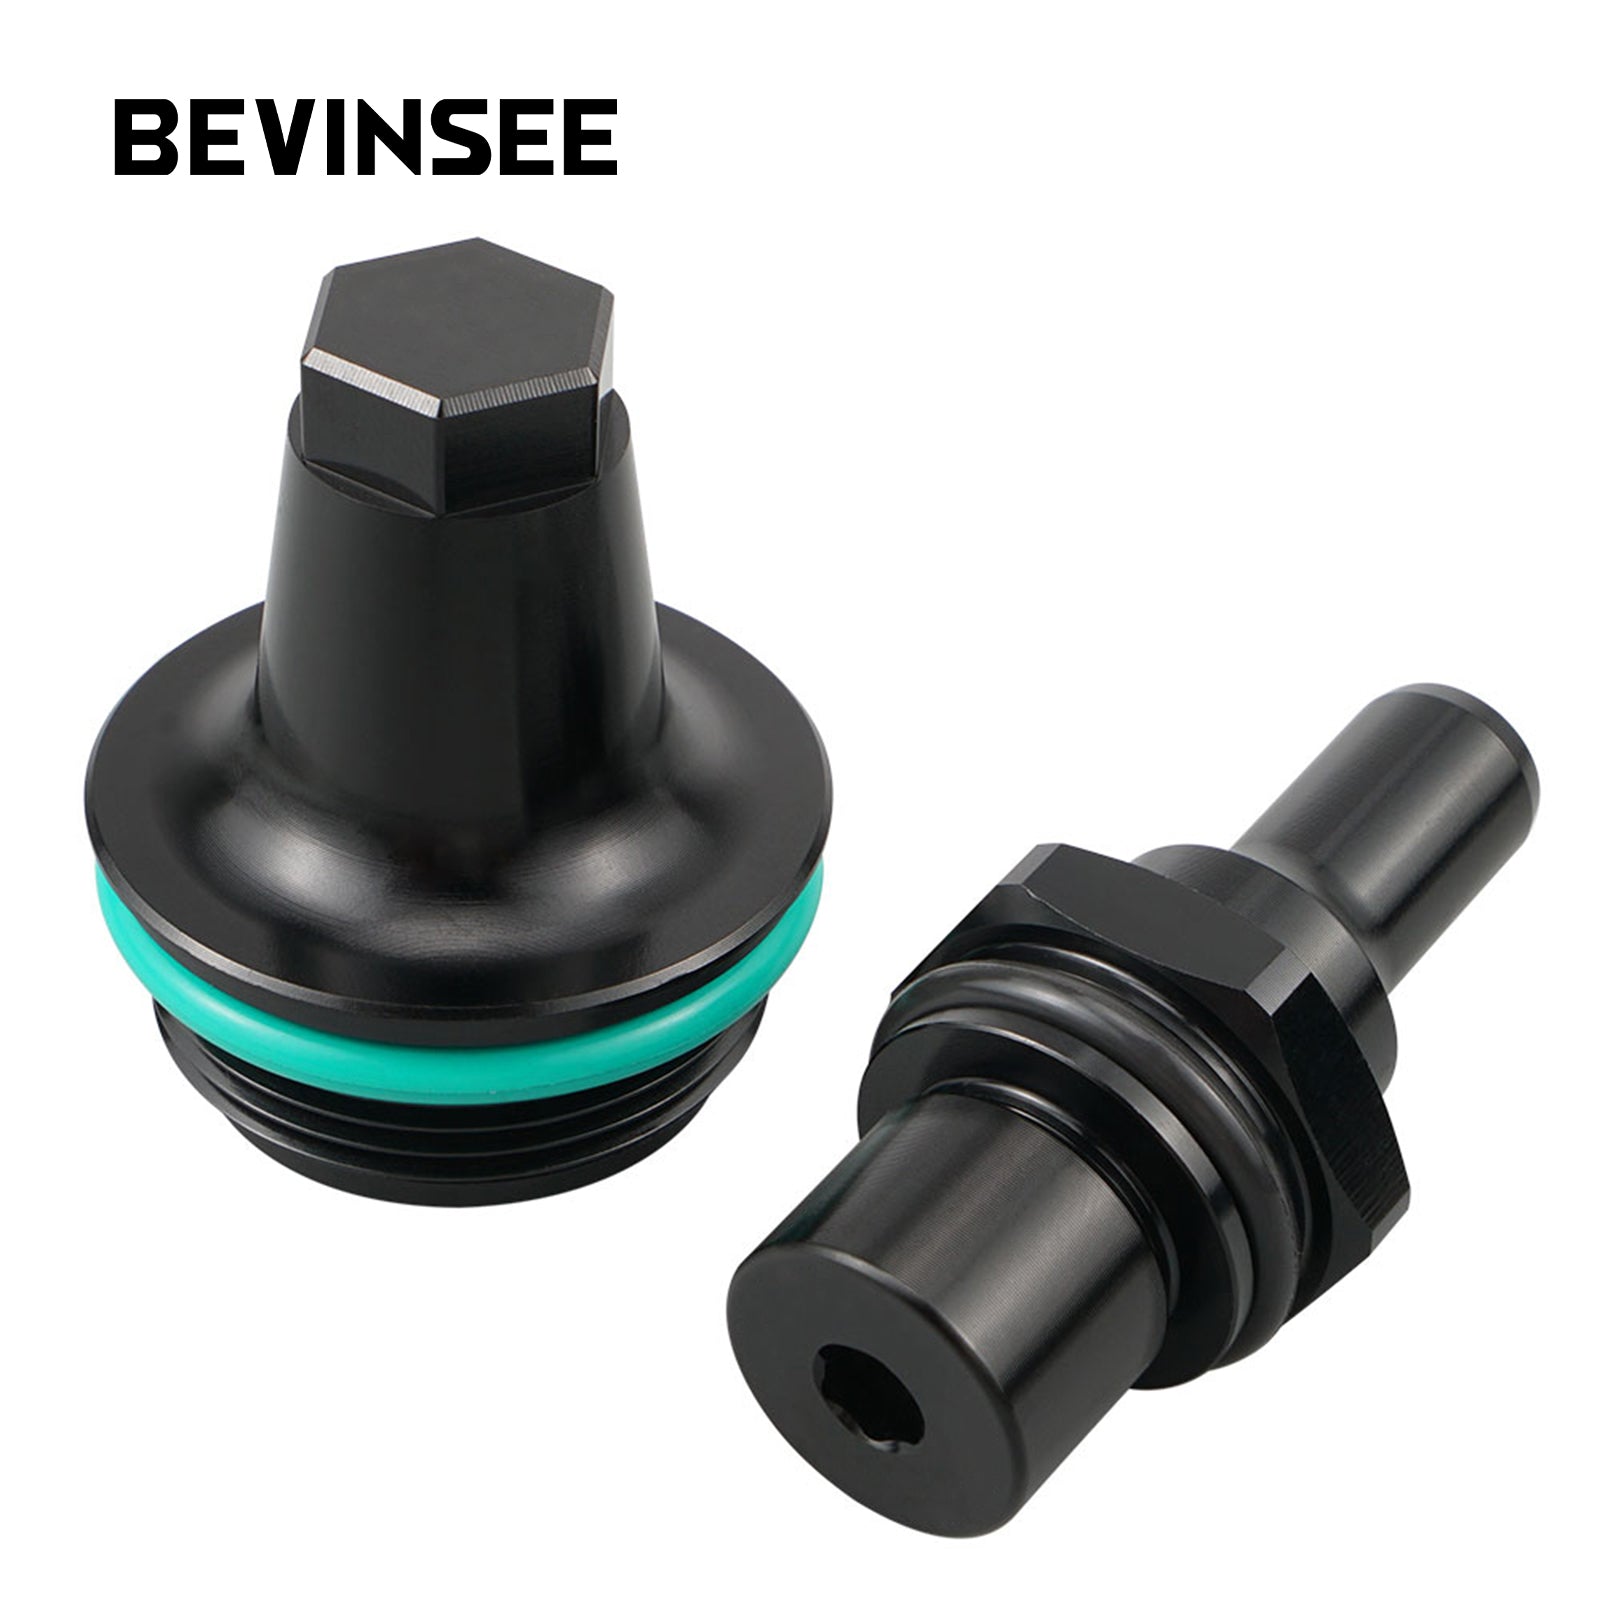 BEVINSEE For N54 PCV Valve + Cover Upgrade For BMW E82 E88 E89 E90 E91 E92 E93 E60 E61 E71 135i 335i 535i X6 Z4 Twin Turbo Engines